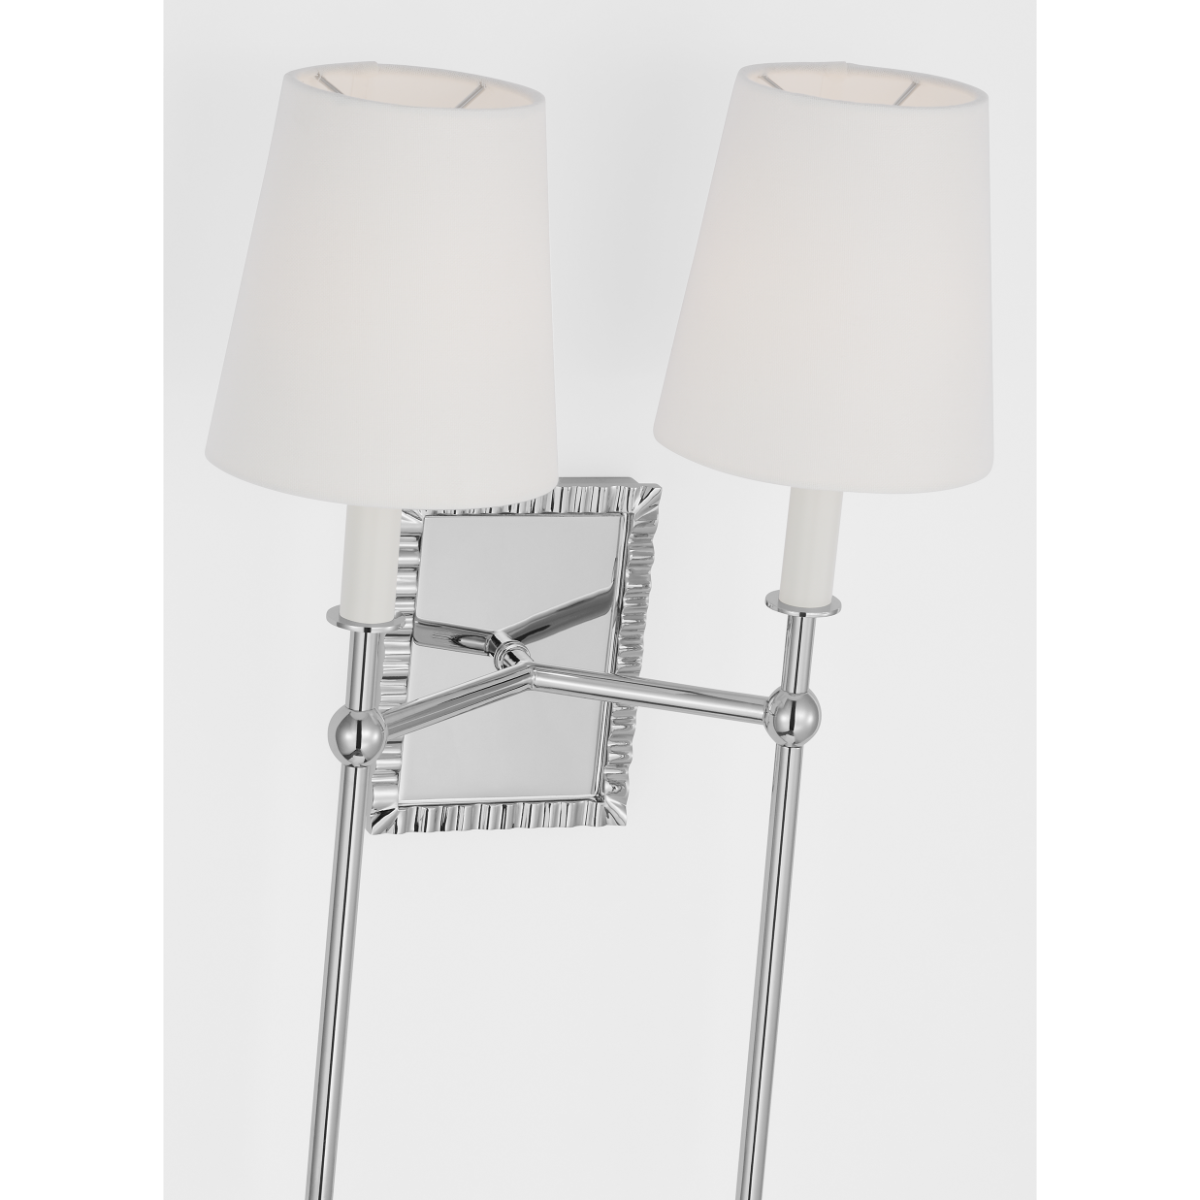 Baxley Double Sconce